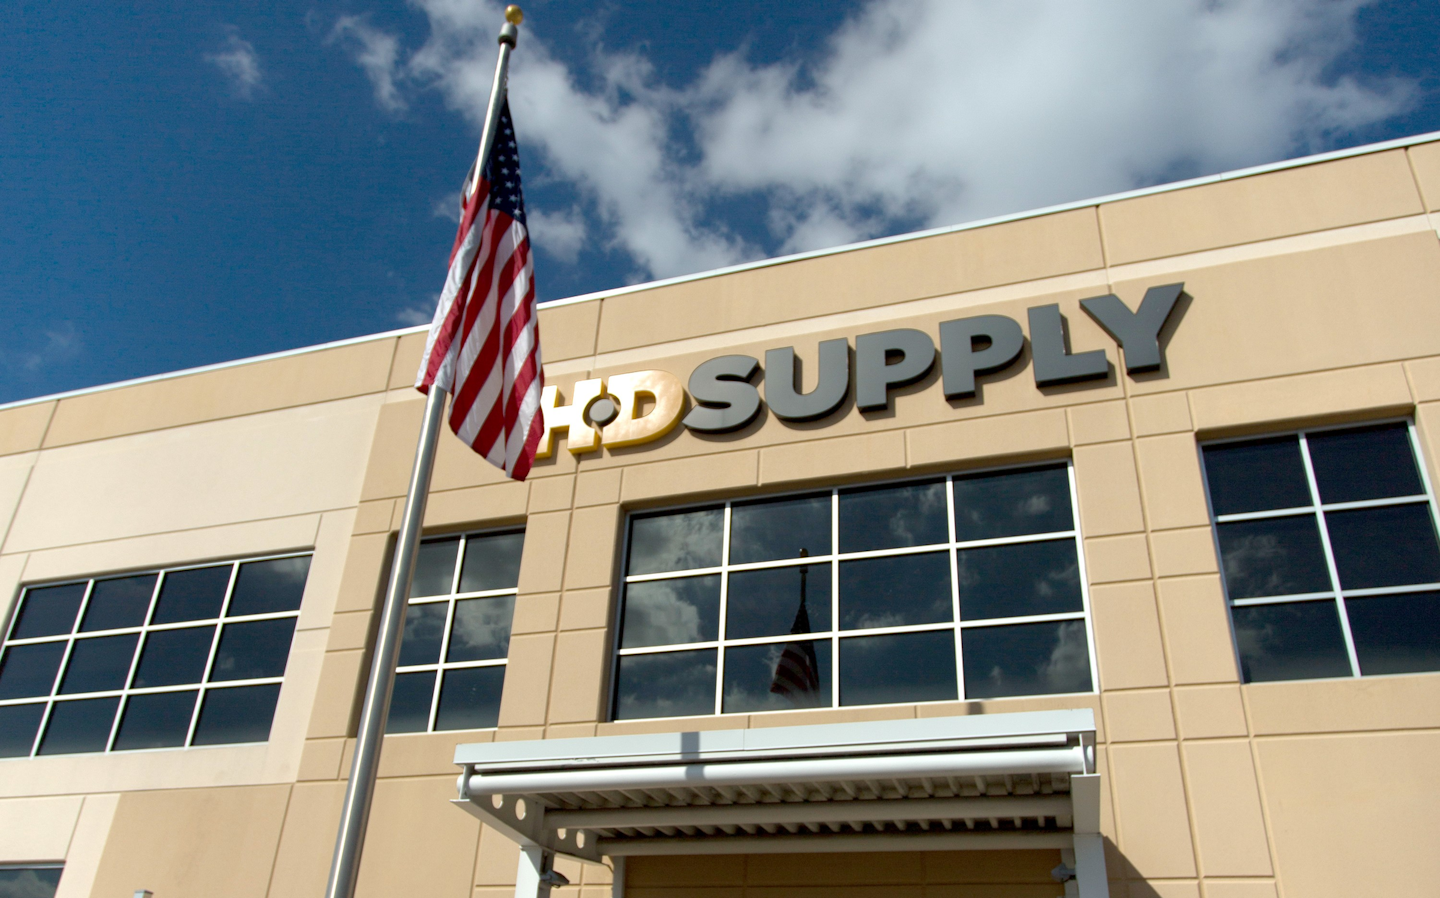 HD Supply Selling White Cap Business to CDR for $2.9 Billion ...